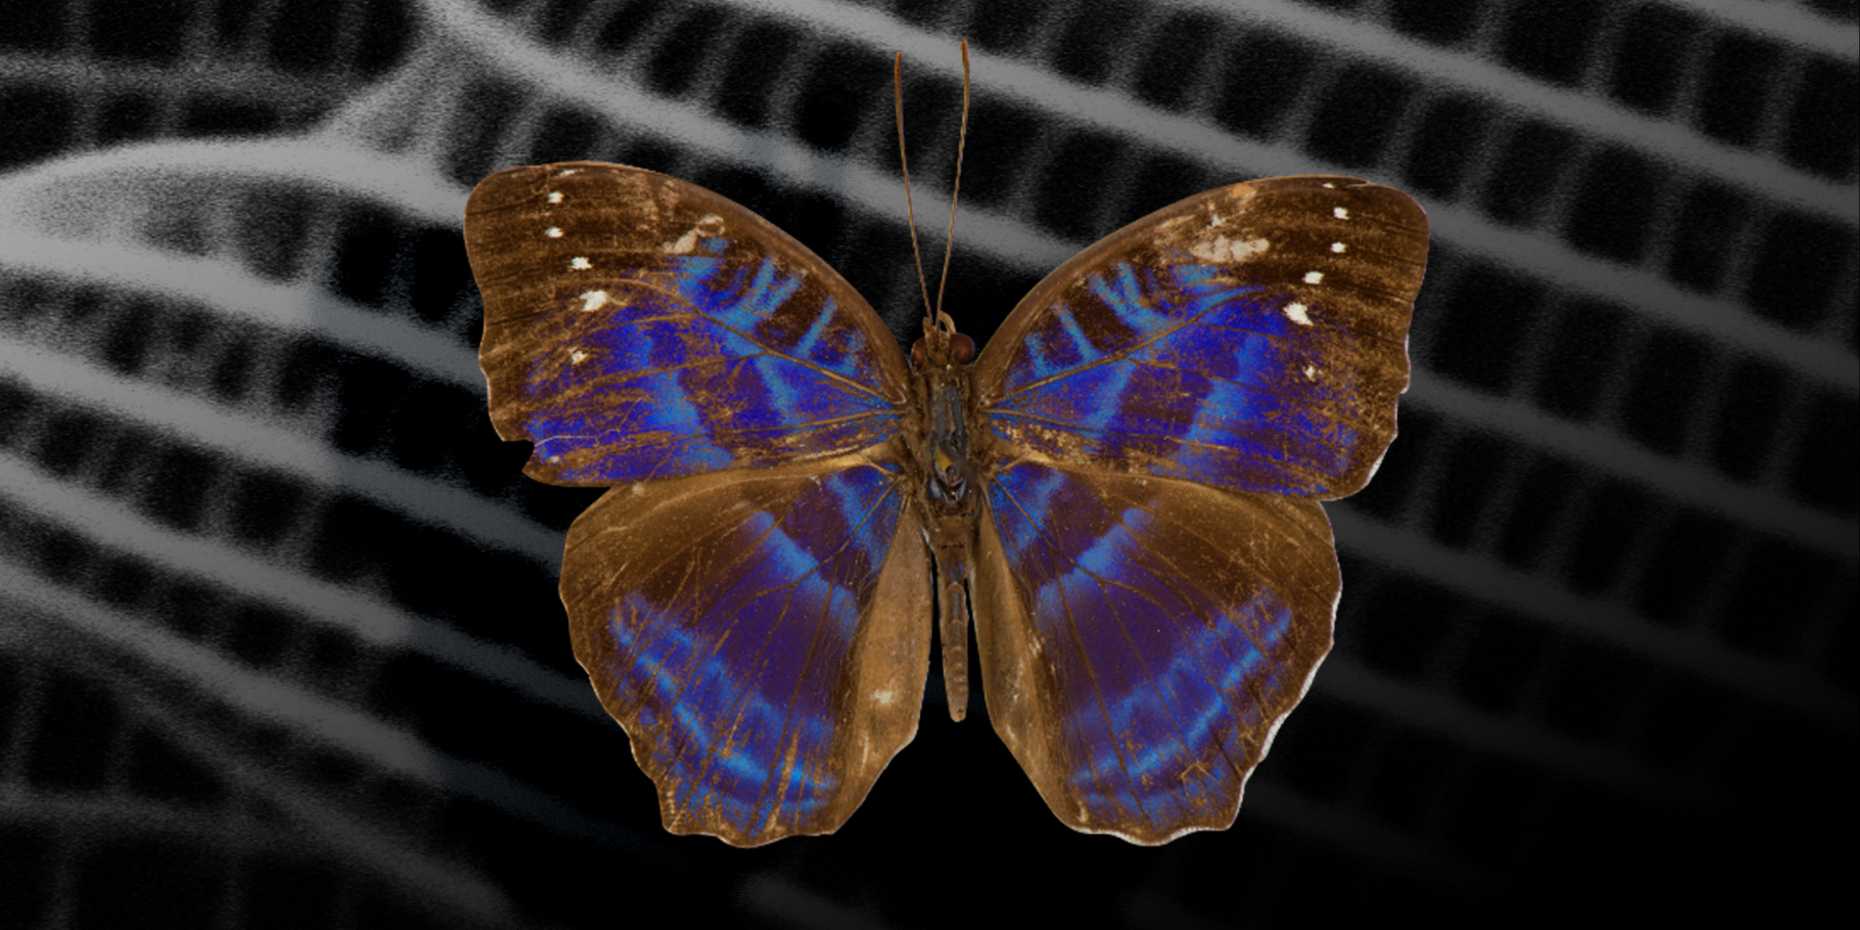 Visualisation of the butterfly species Cynandra opis